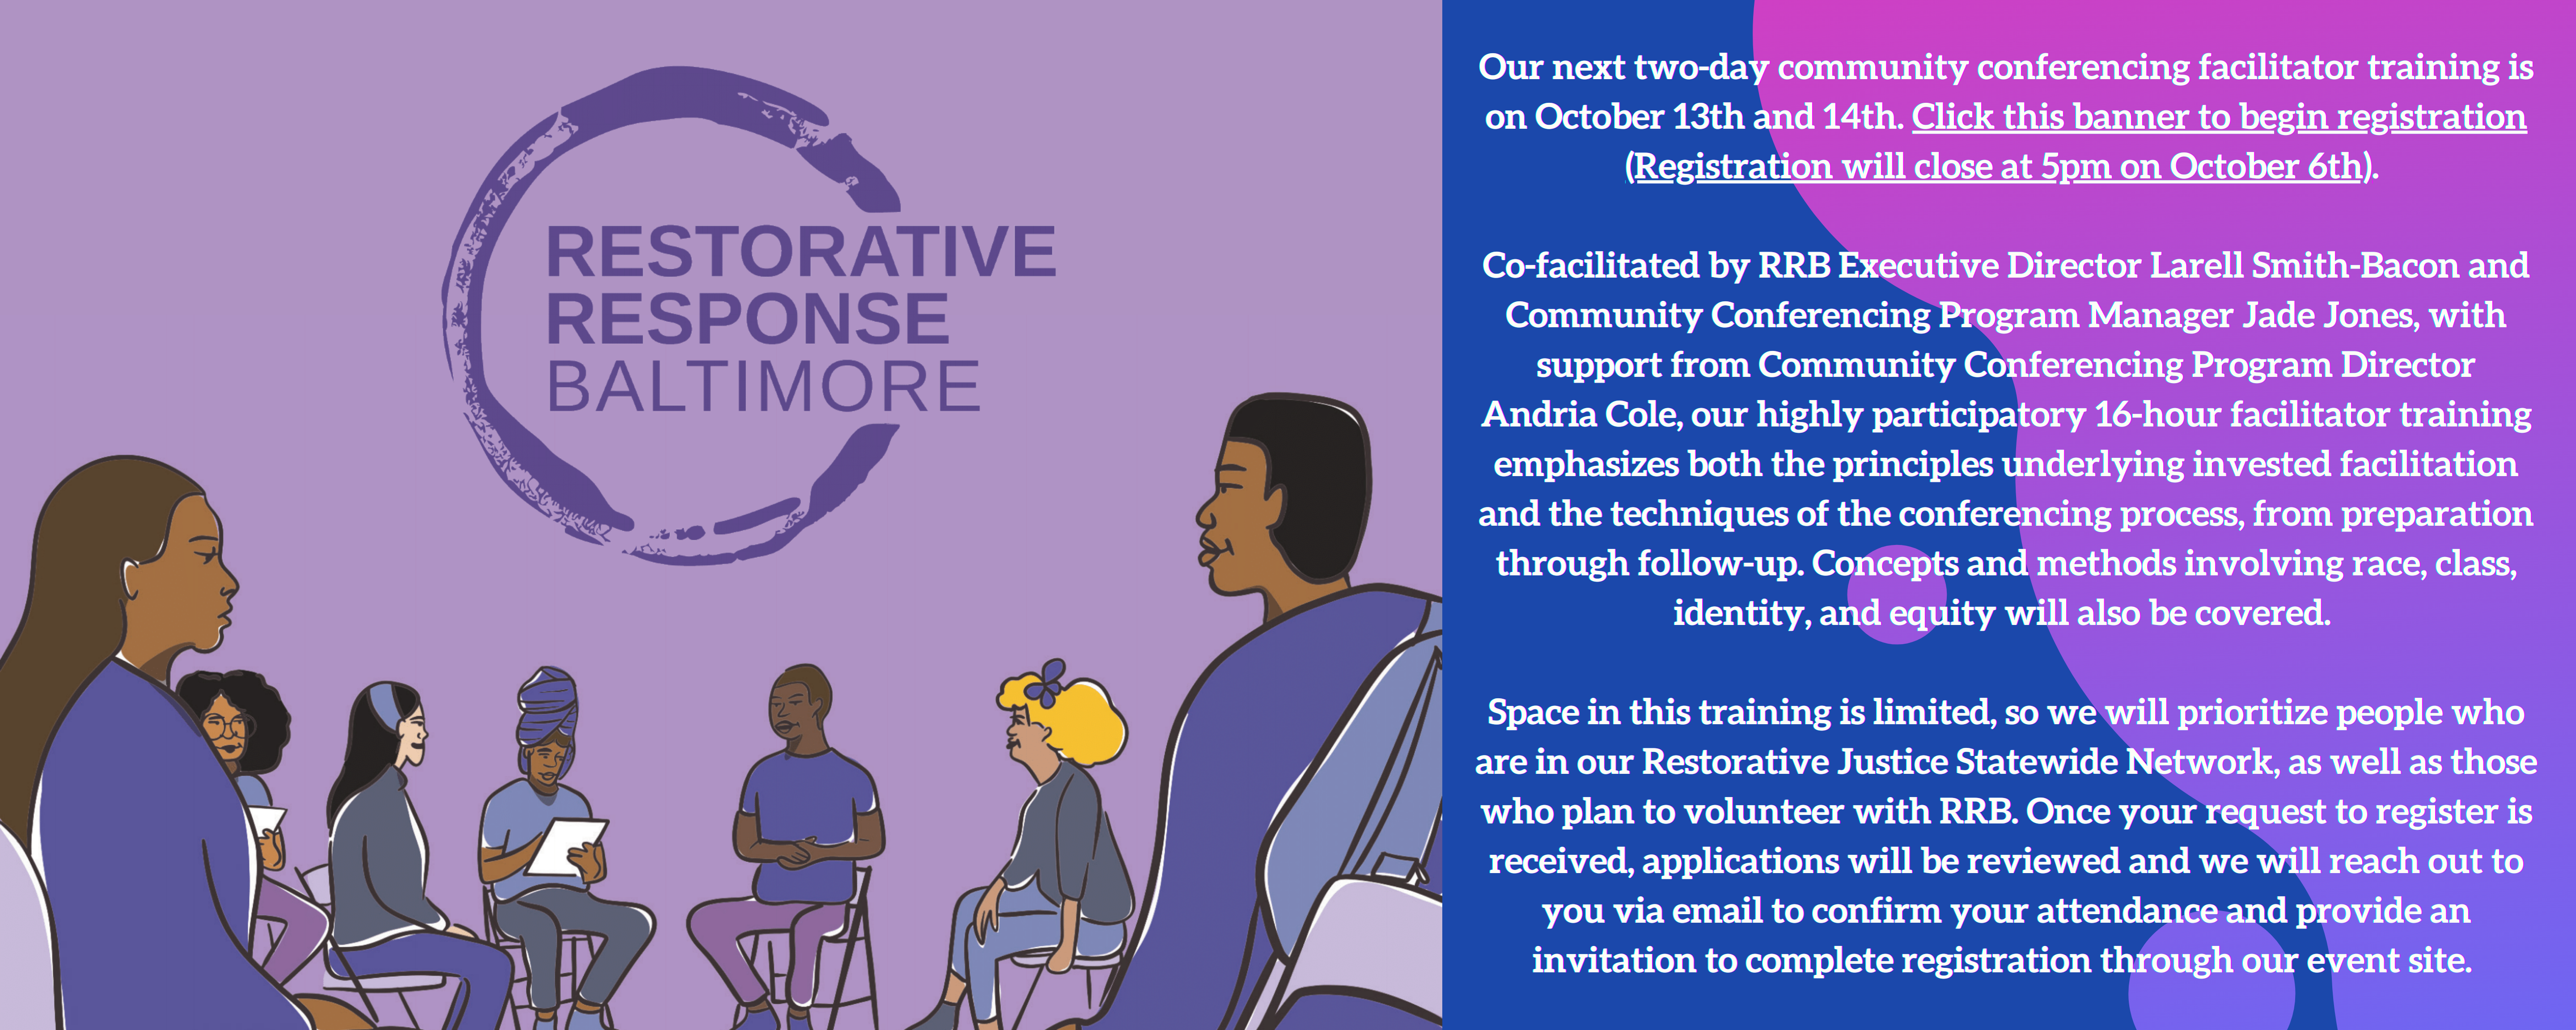 Illustrated graphic at left featuring RRB’s purple circular logo, with a group of illustrated adults Black and Brown adults sitting in circle format; text at right reads - Our next two-day community conferencing facilitator training is on October 13th and 14th. Click this banner to begin registration (Registration will close at 5pm on October 6th). Co-facilitated by RRB Executive Director Larell Smith-Bacon and Community Conferencing Program Manager Jade Jones, with support from Community Conferencing Program Director Andria Cole, our highly participatory 16-hour facilitator training emphasizes both the principles underlying invested facilitation and the techniques of the conferencing process, from preparation through follow-up. Concepts and methods involving race, class, identity, and equity will also be covered. Space in this training is limited, so we will prioritize people who are in our Restorative Justice Statewide Network, as well as those who plan to volunteer with RRB. Once your request to register is received, applications will be reviewed and we will reach out to you via email to confirm your attendance and provide an invitation to complete registration through our event site.